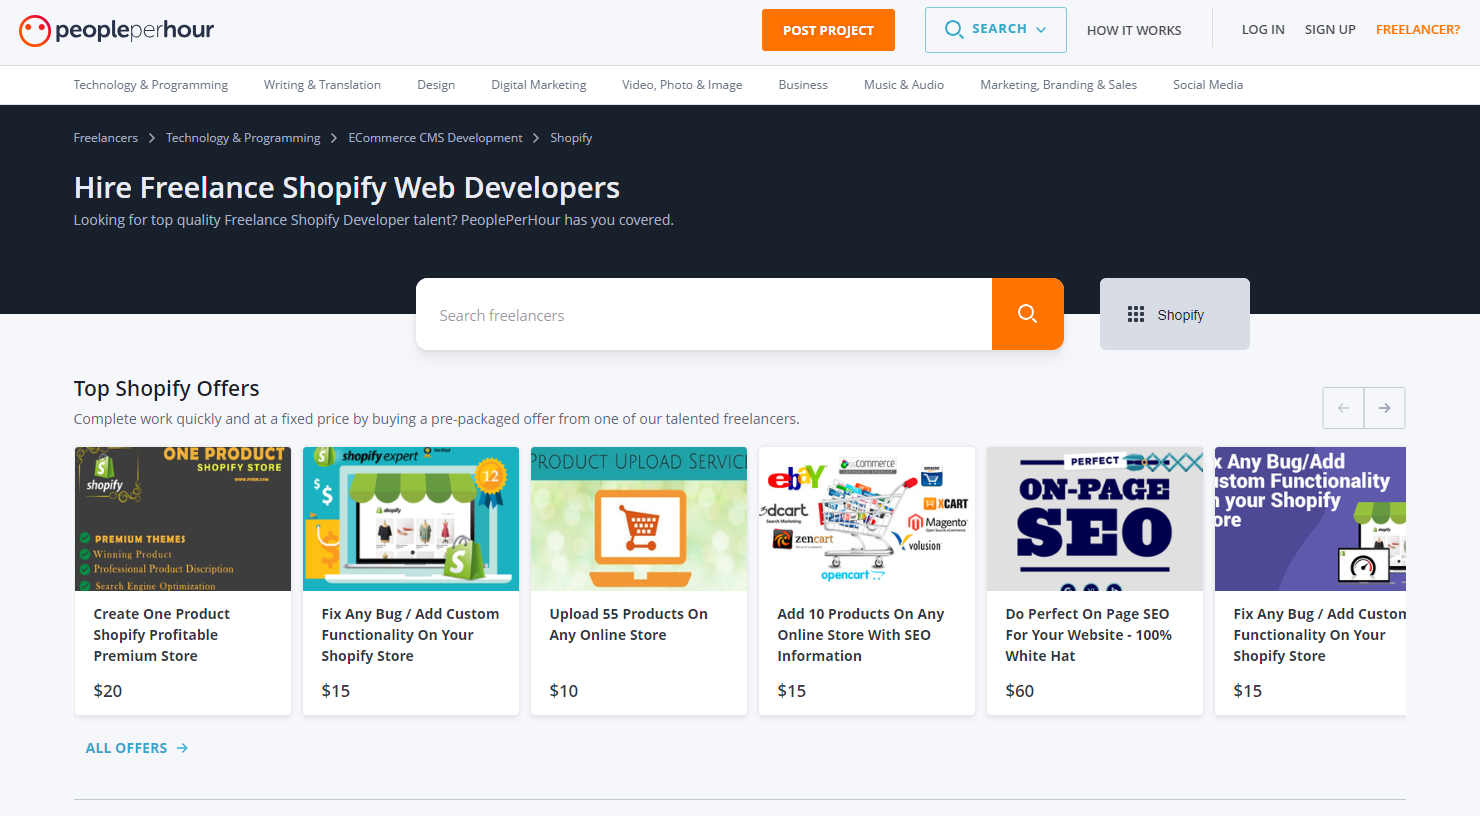 Peopleperhour - Highly Skilled Shopify Developers at Affordable Hourly Rates